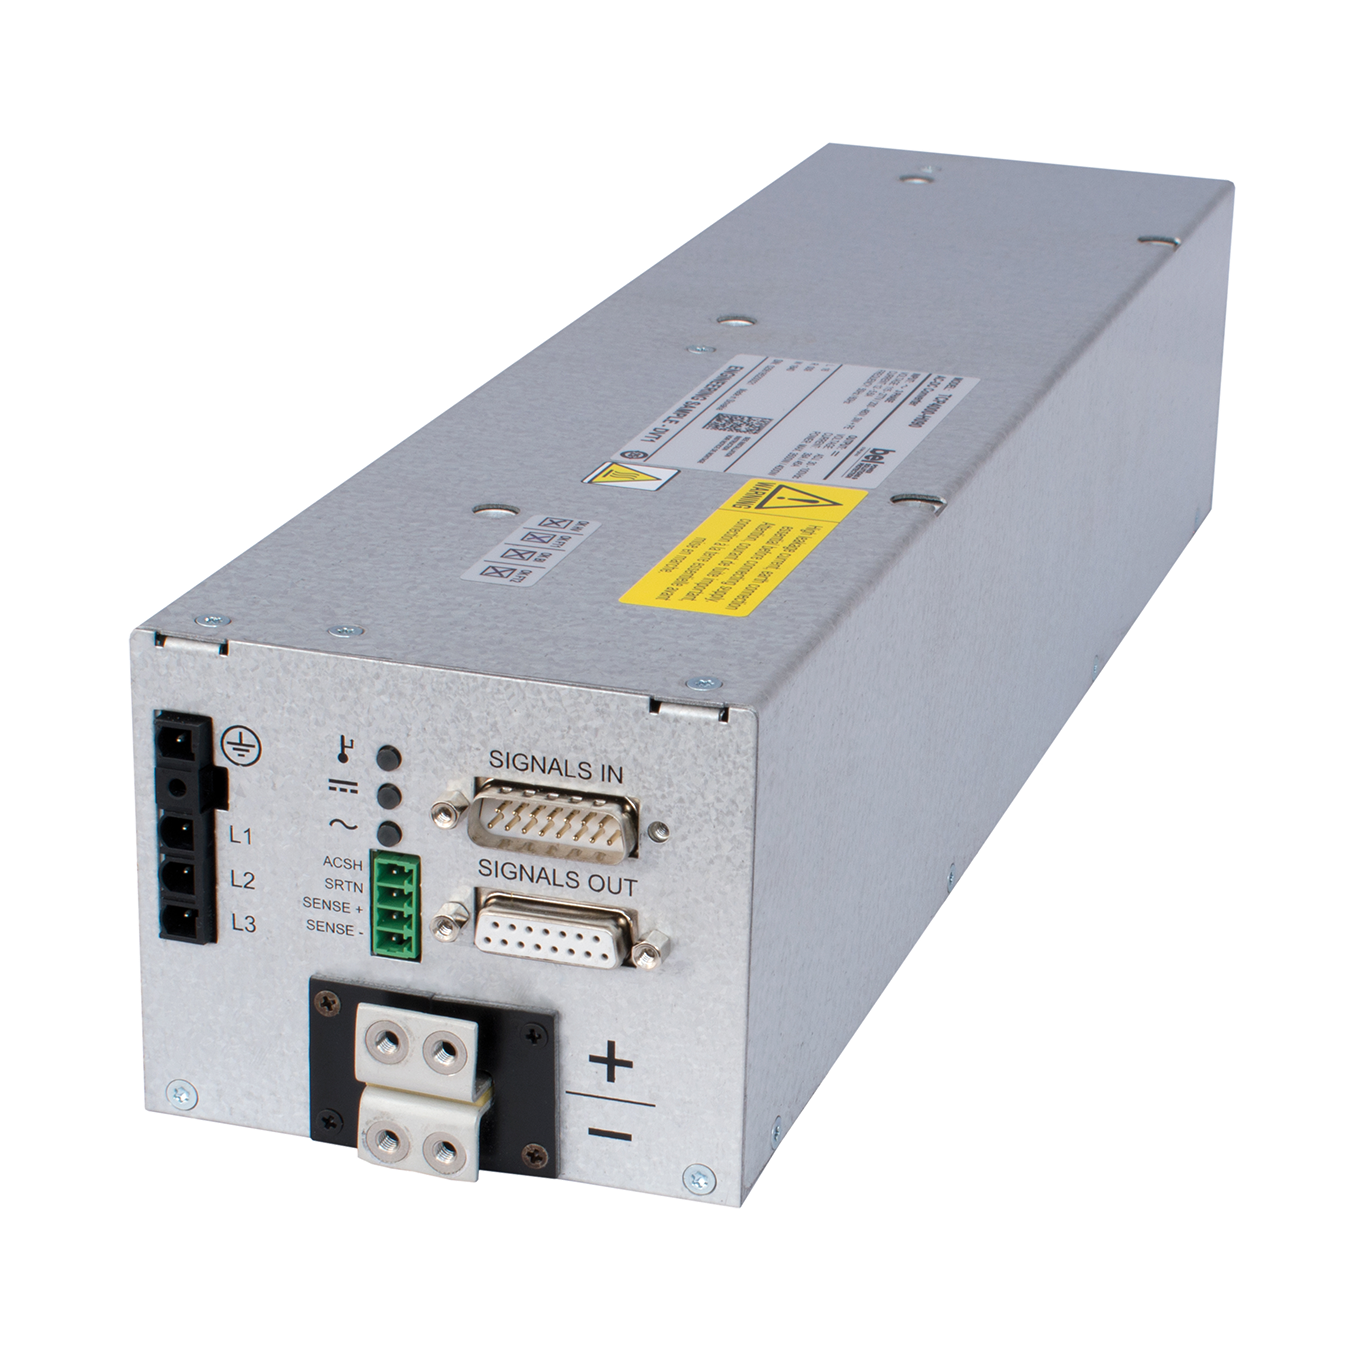 Fanless 4 kW Power Supply Offers Wide Adjustable Output